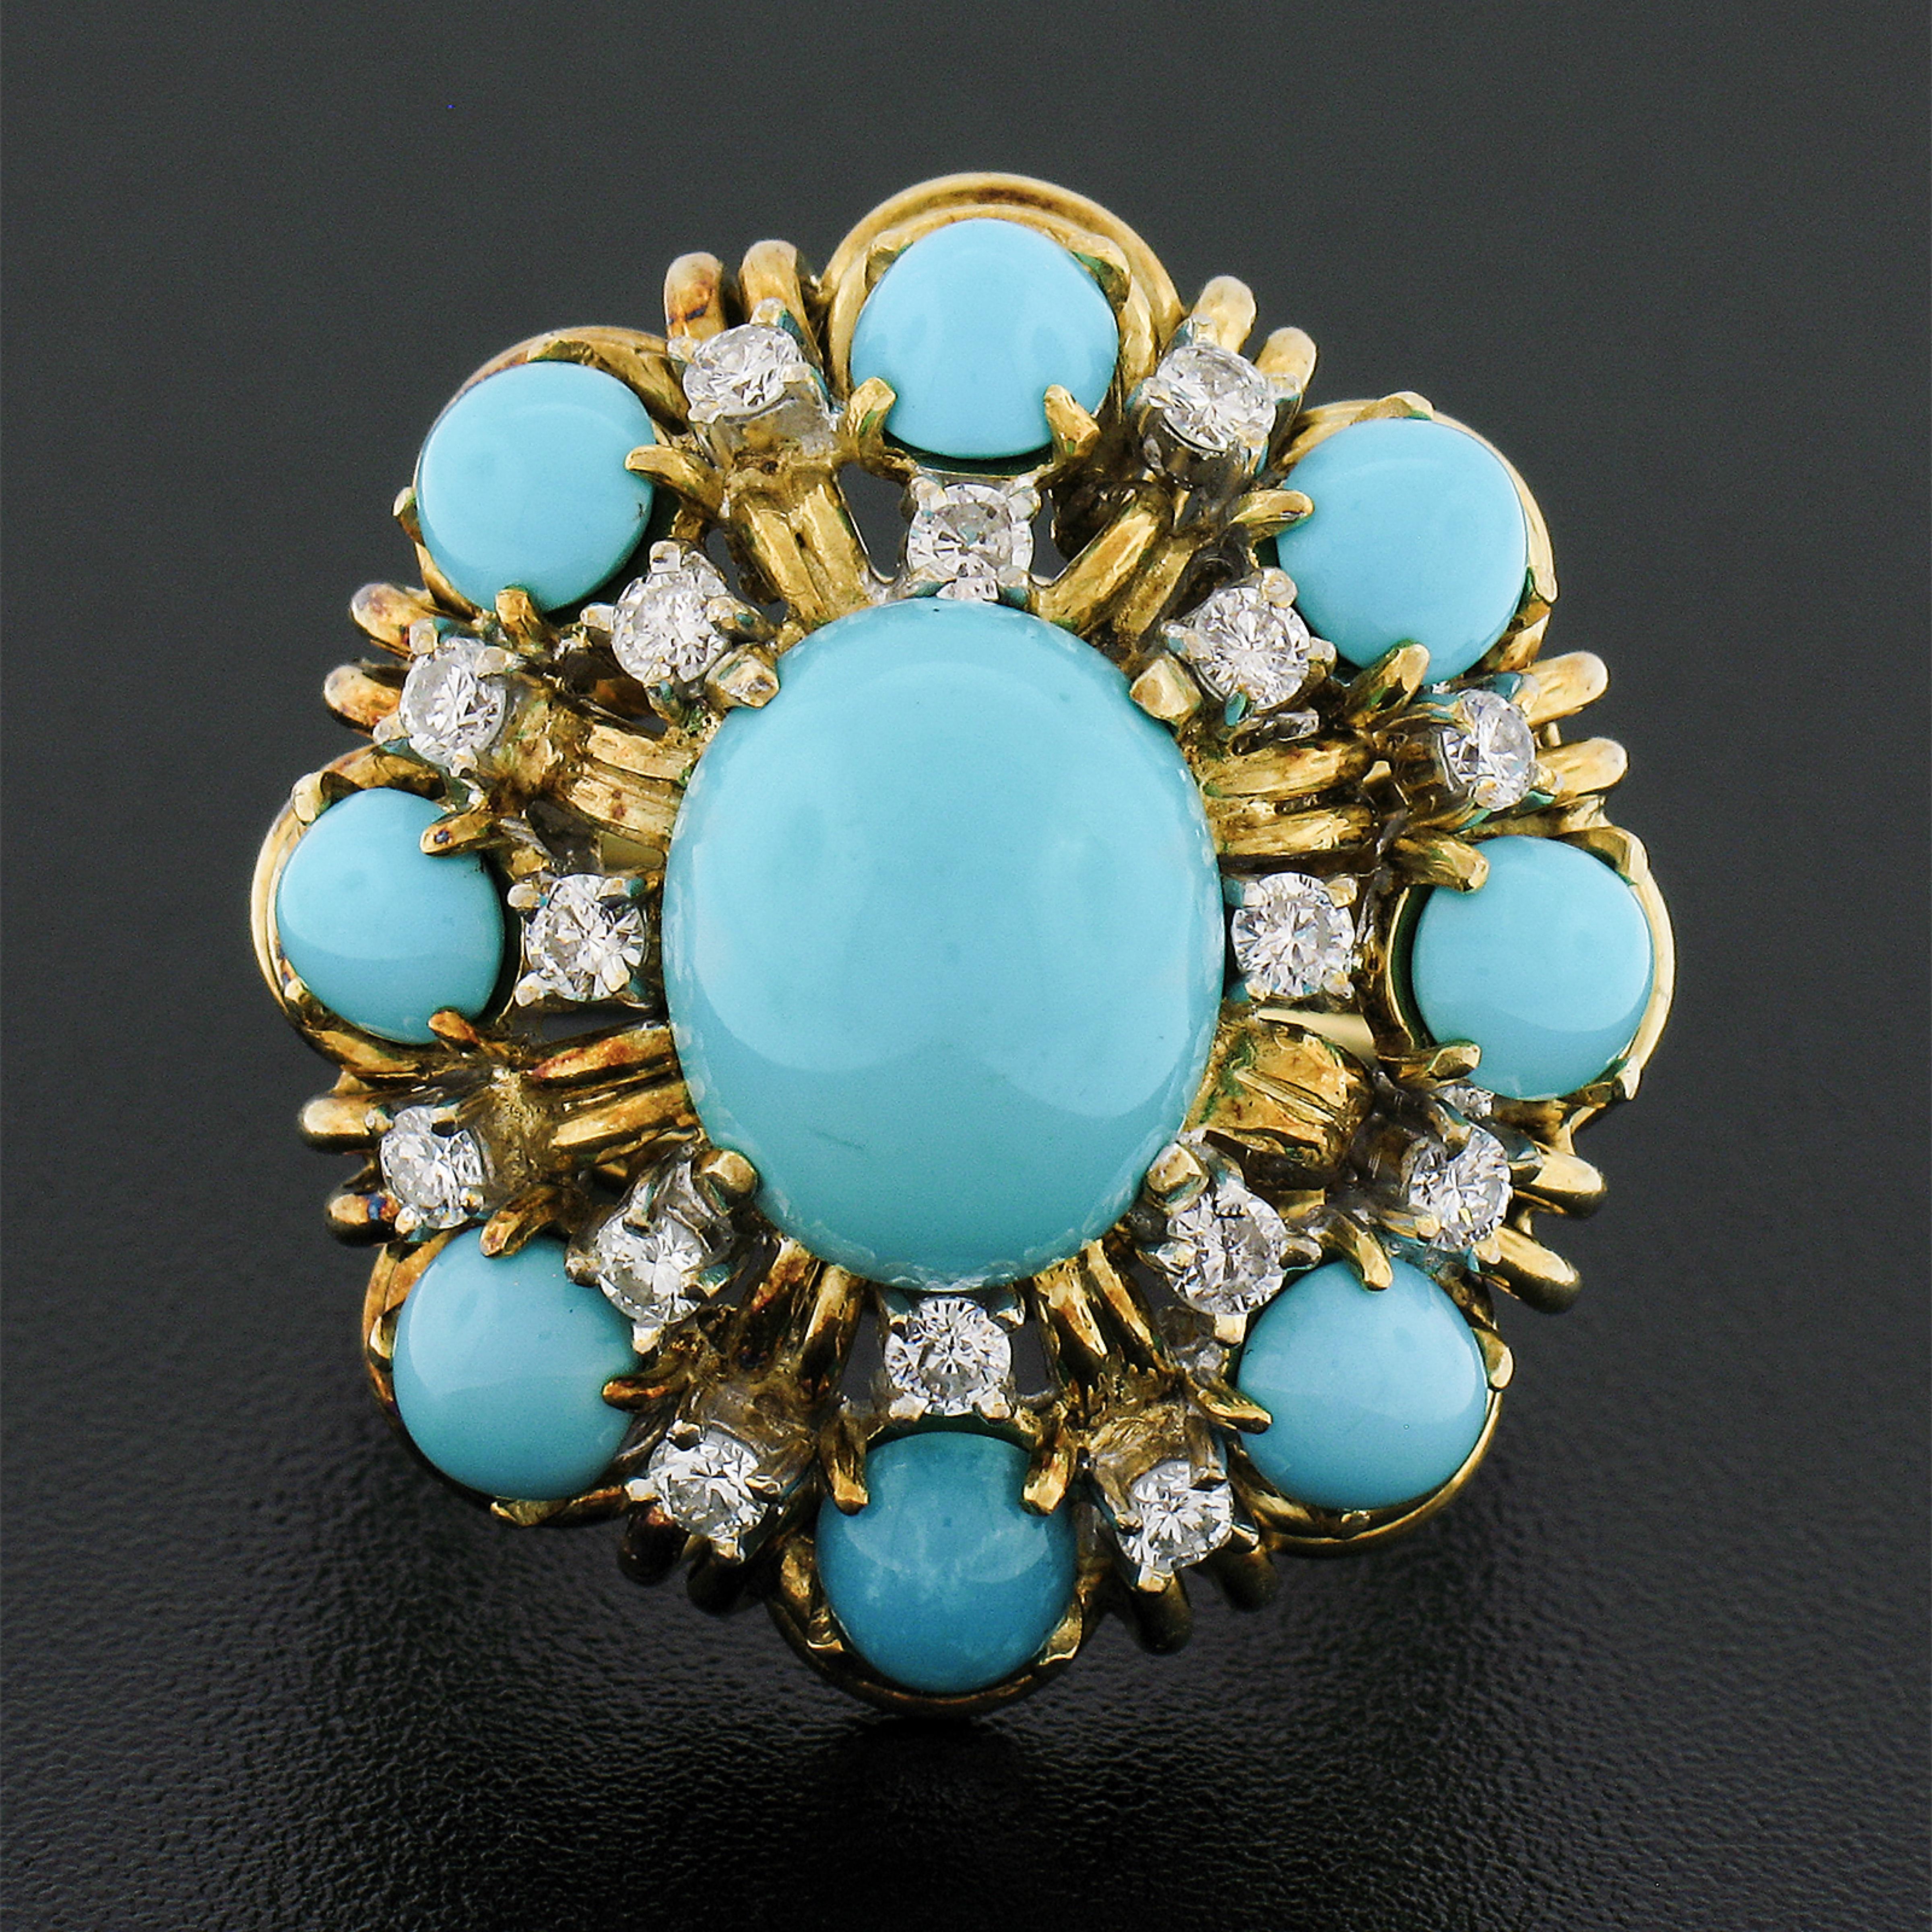 You are looking at a beautiful vintage ring that was crafted from solid 14k yellow gold featuring genuine turquoise stones neatly set throughout an elegant handmade wire work design. A larger oval cabochon cut turquoise is neatly set at the center